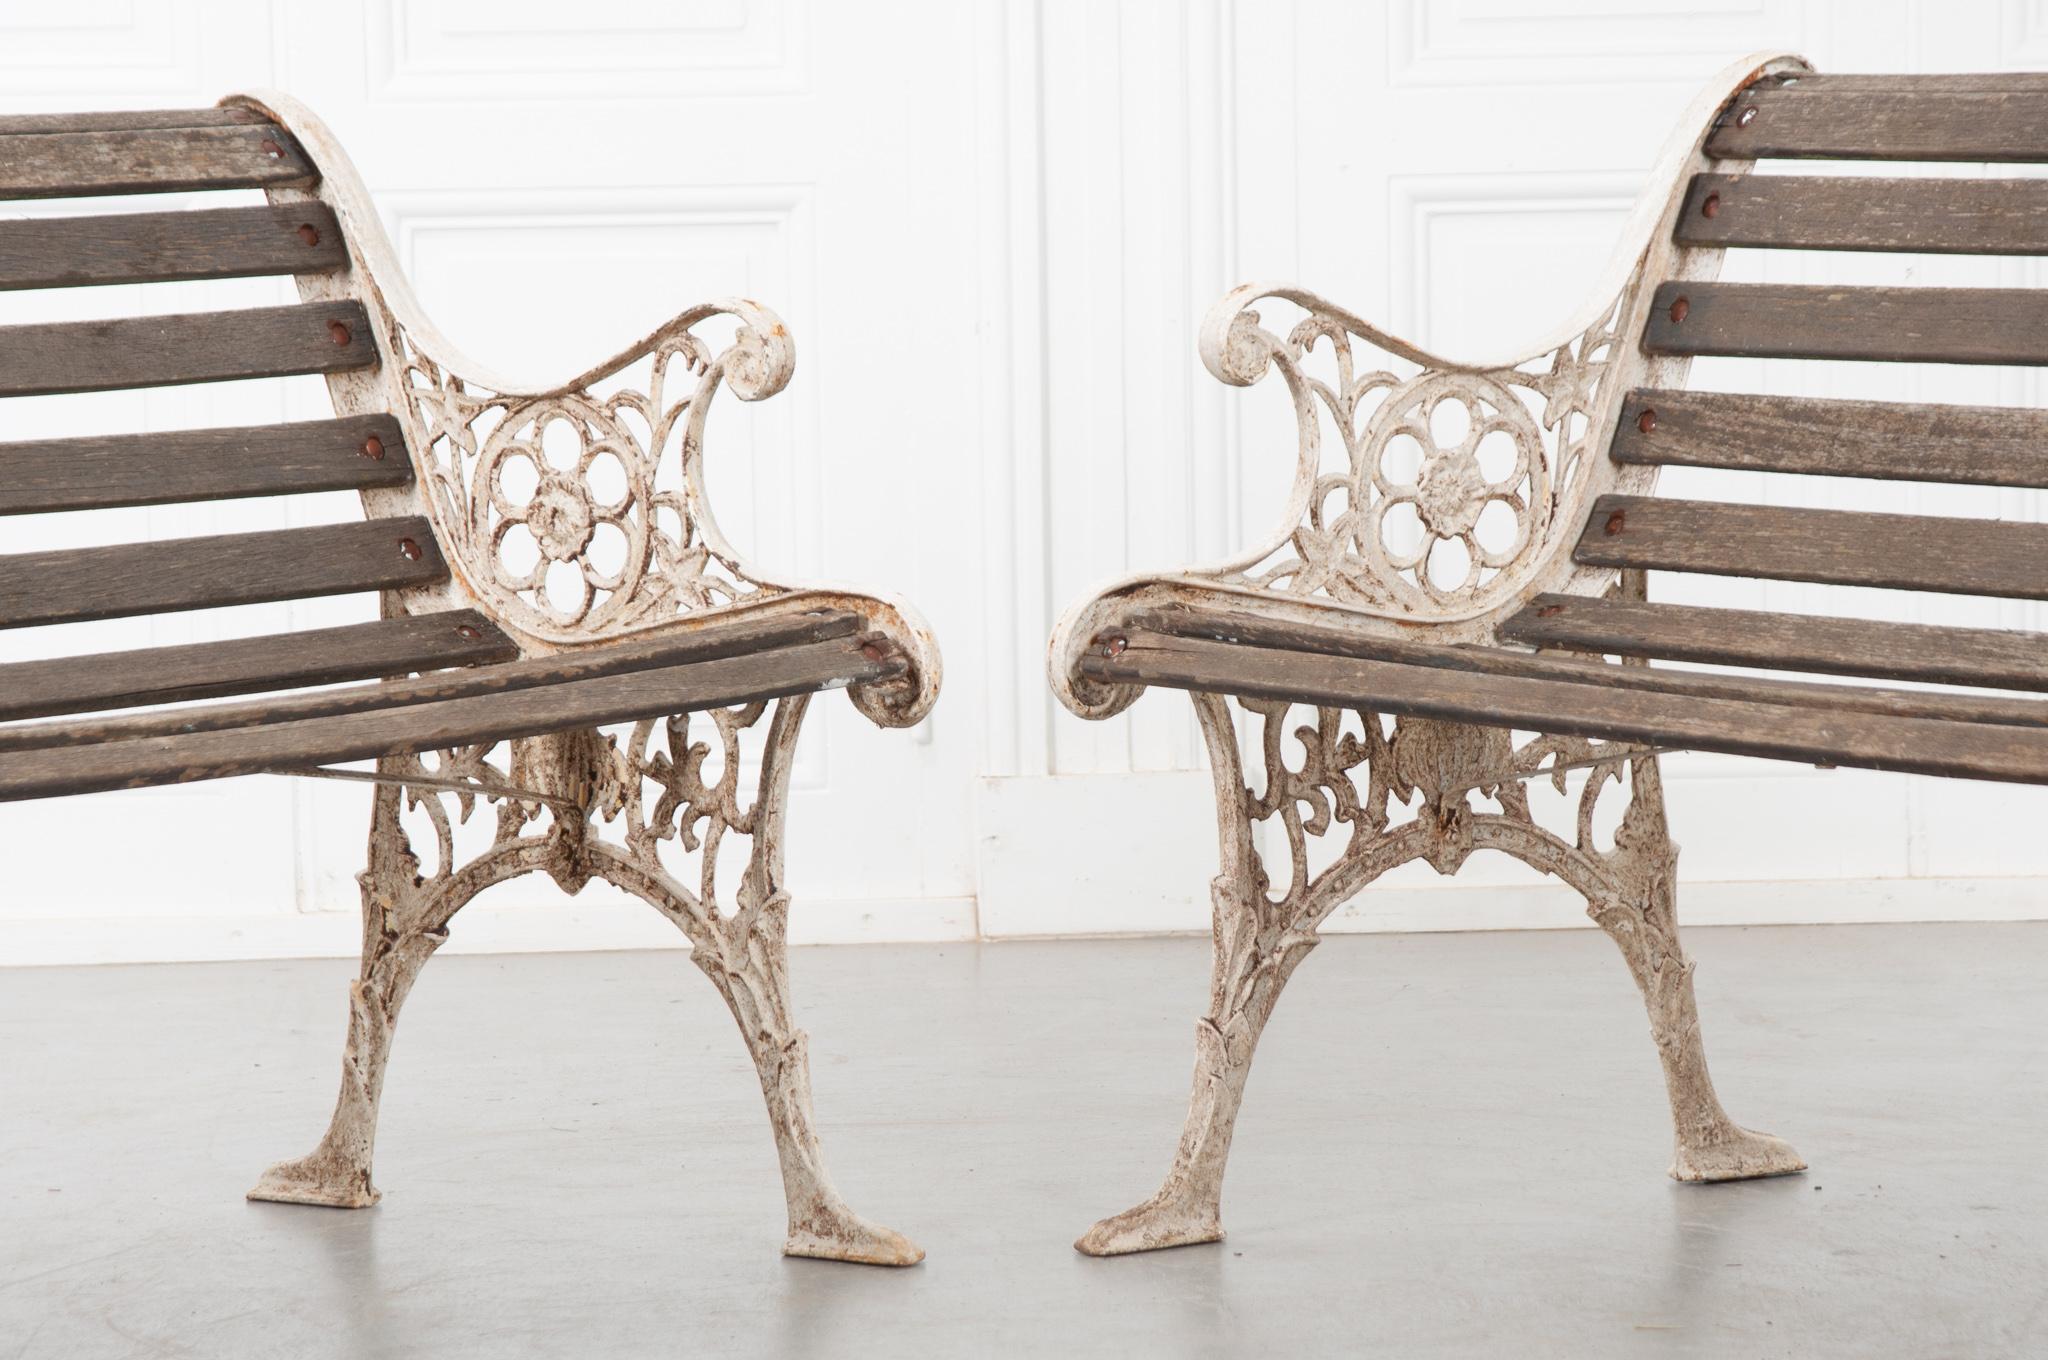 Neoclassical Pair of Vintage Garden Benches